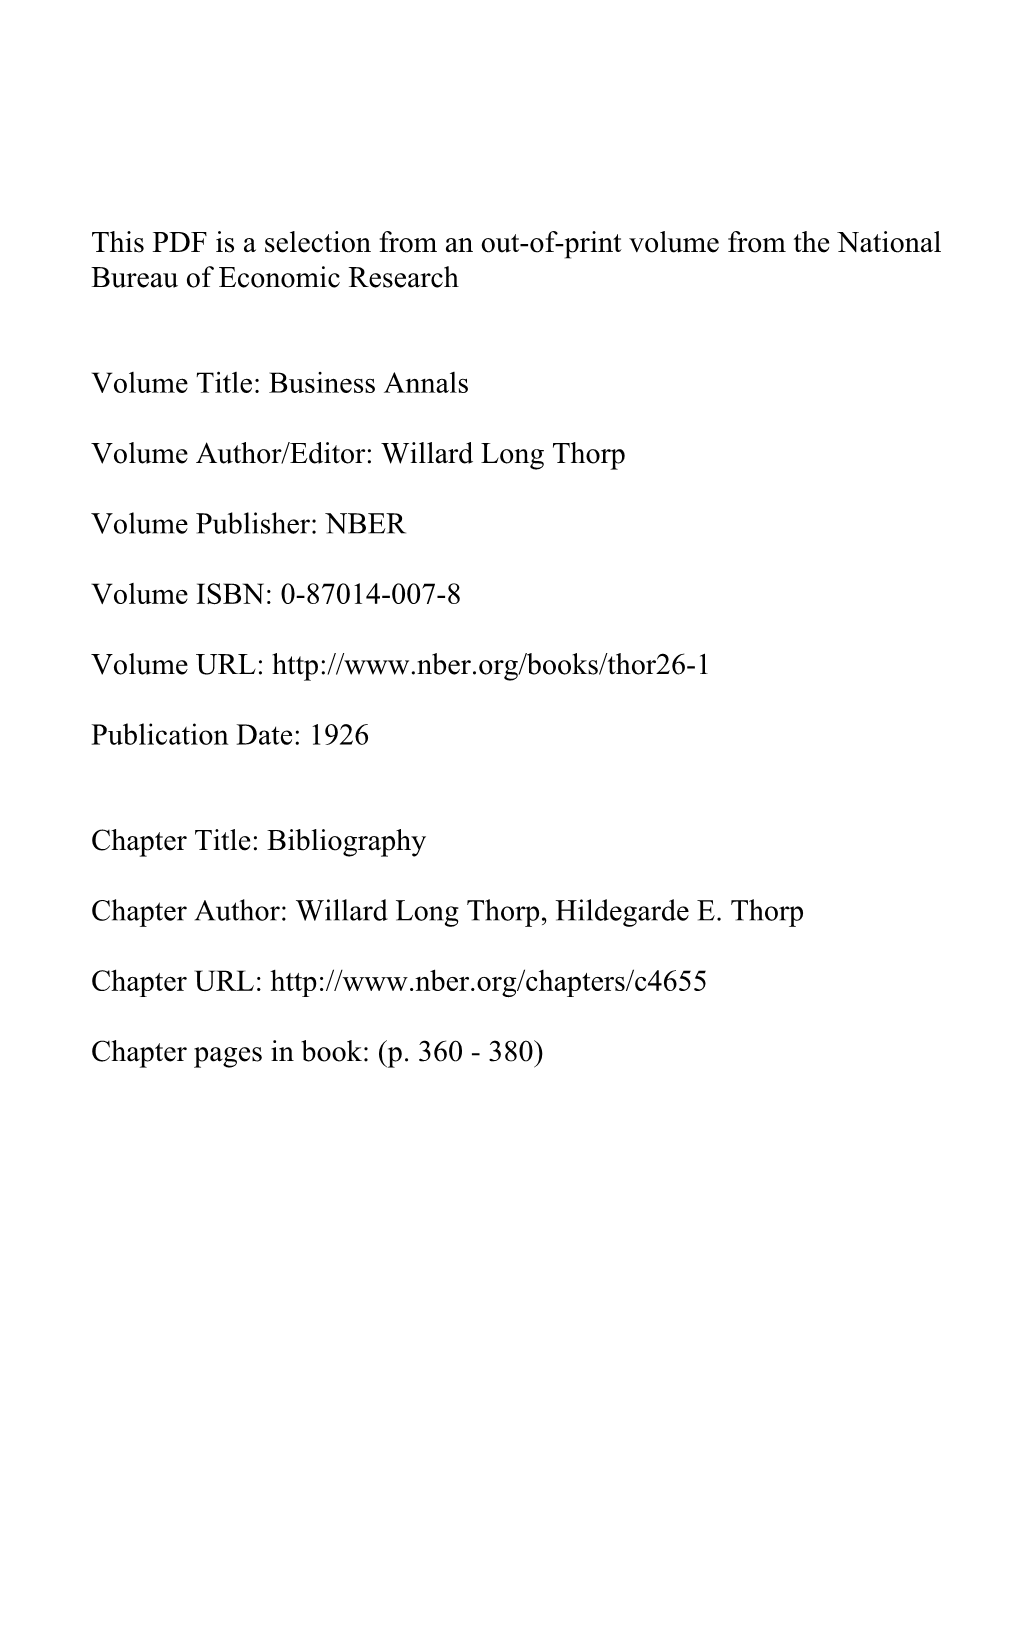 This PDF Is a Selection from an Out-Of-Print Volume from the National Bureau of Economic Research Volume Title: Business Annals